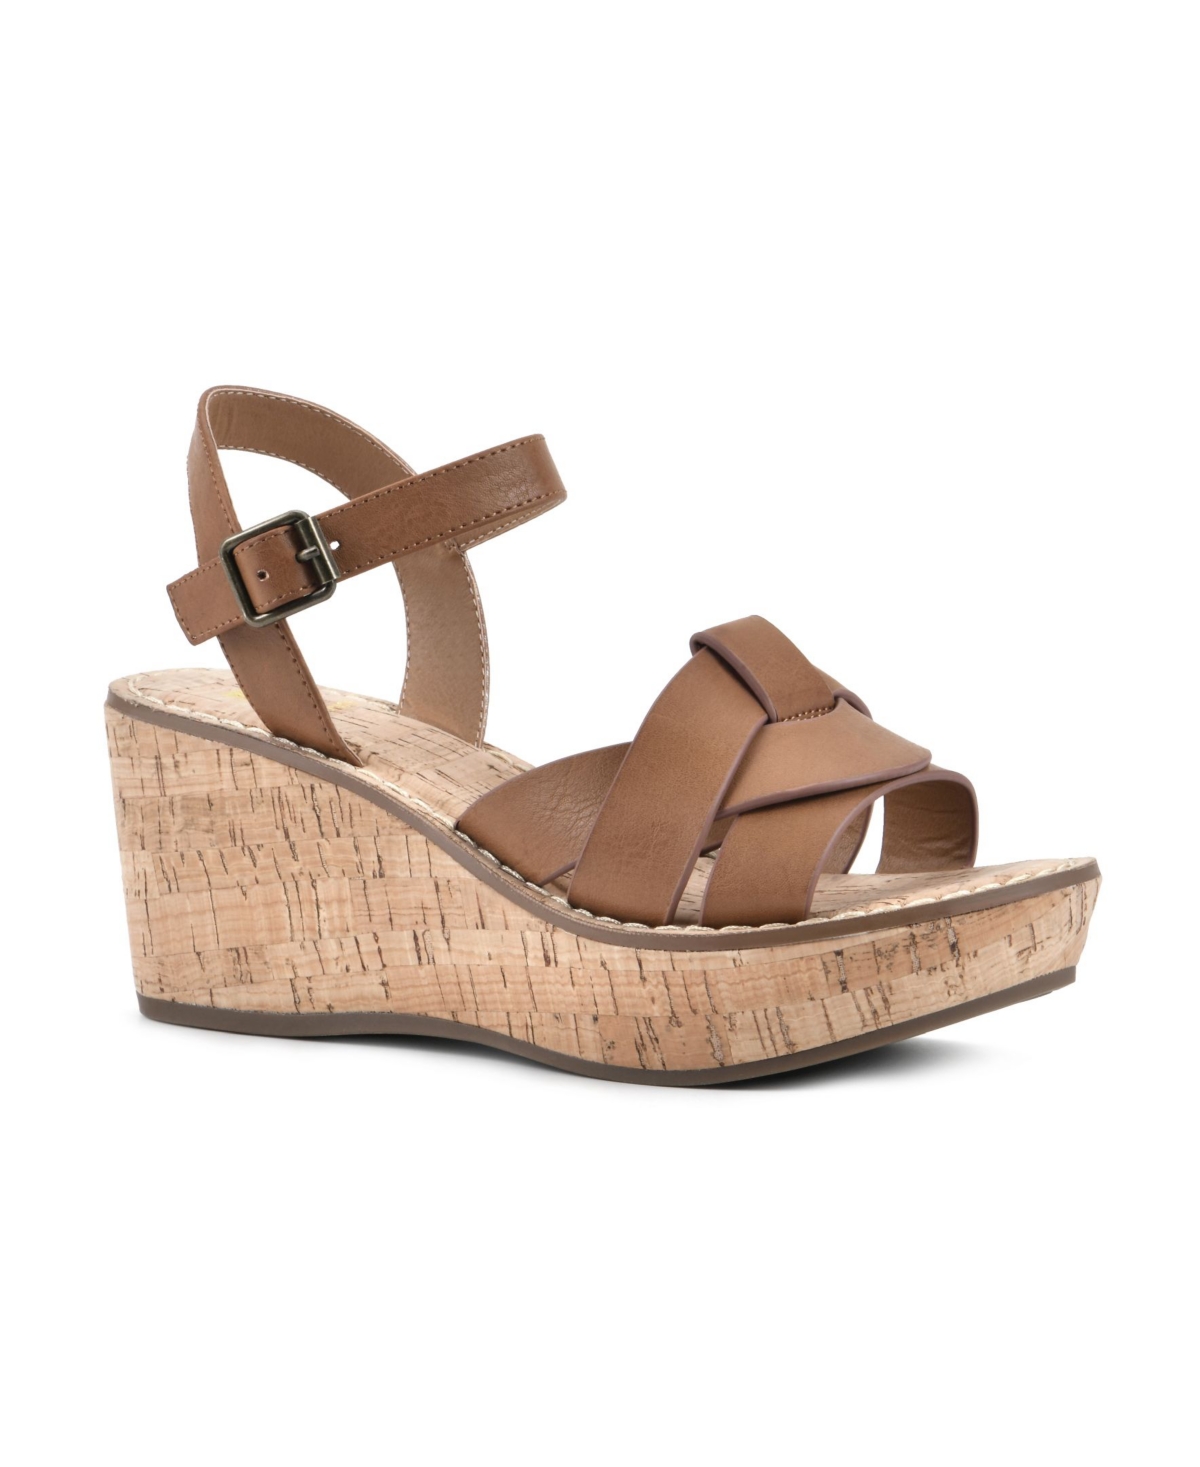 WHITE MOUNTAIN WOMEN'S SIMPLE WEDGE SANDALS WOMEN'S SHOES